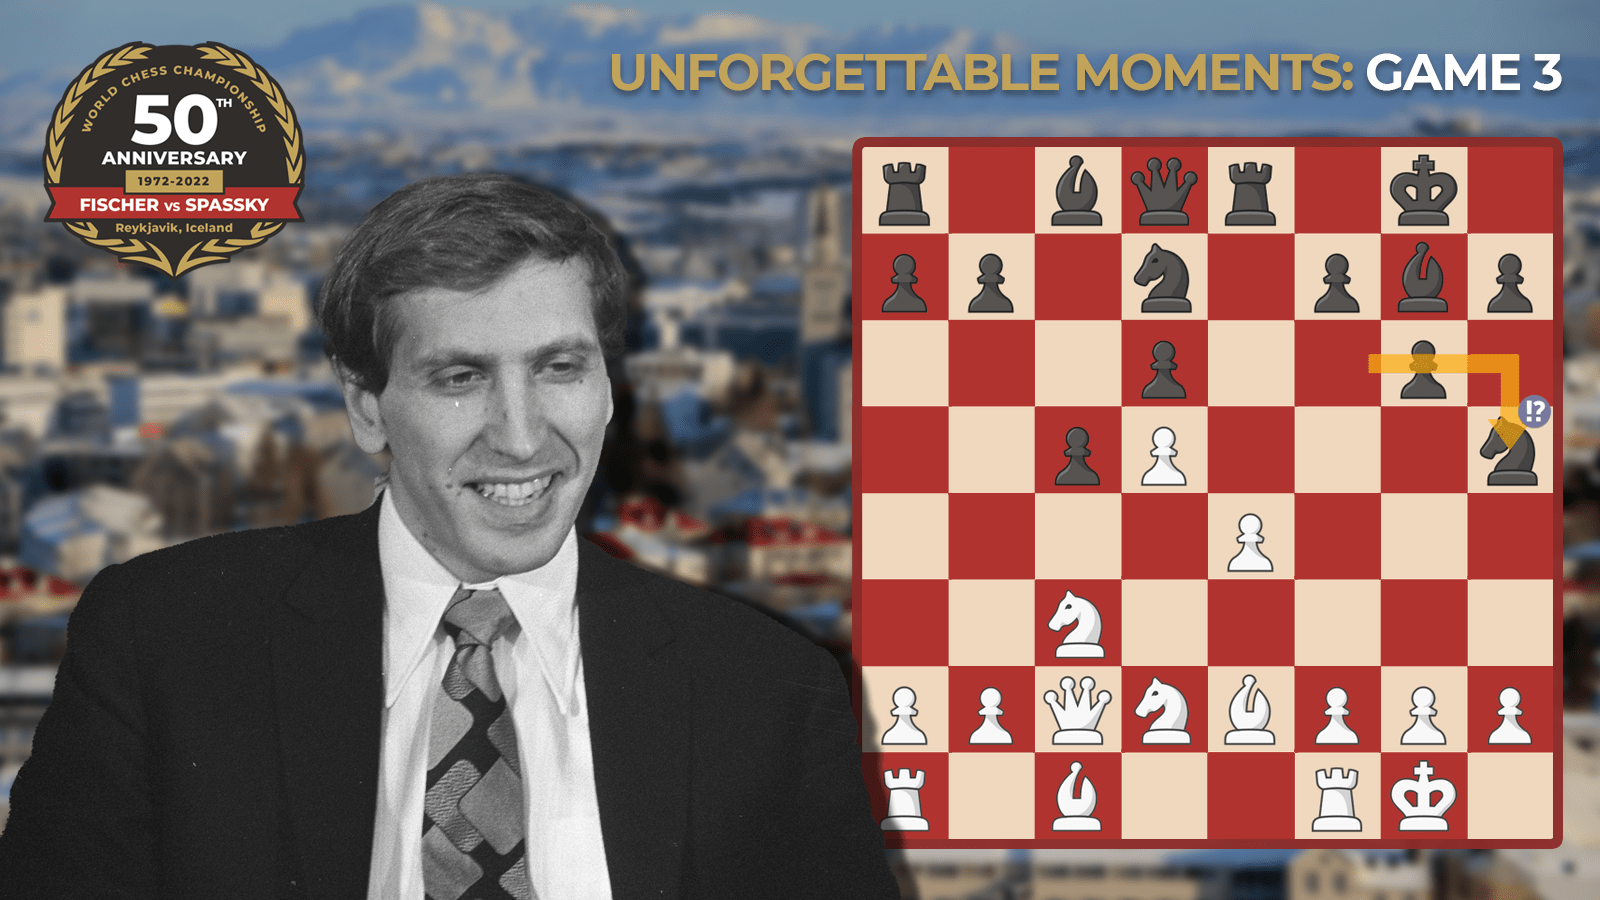 The chess grandmaster drama that led to a fistfight, explained